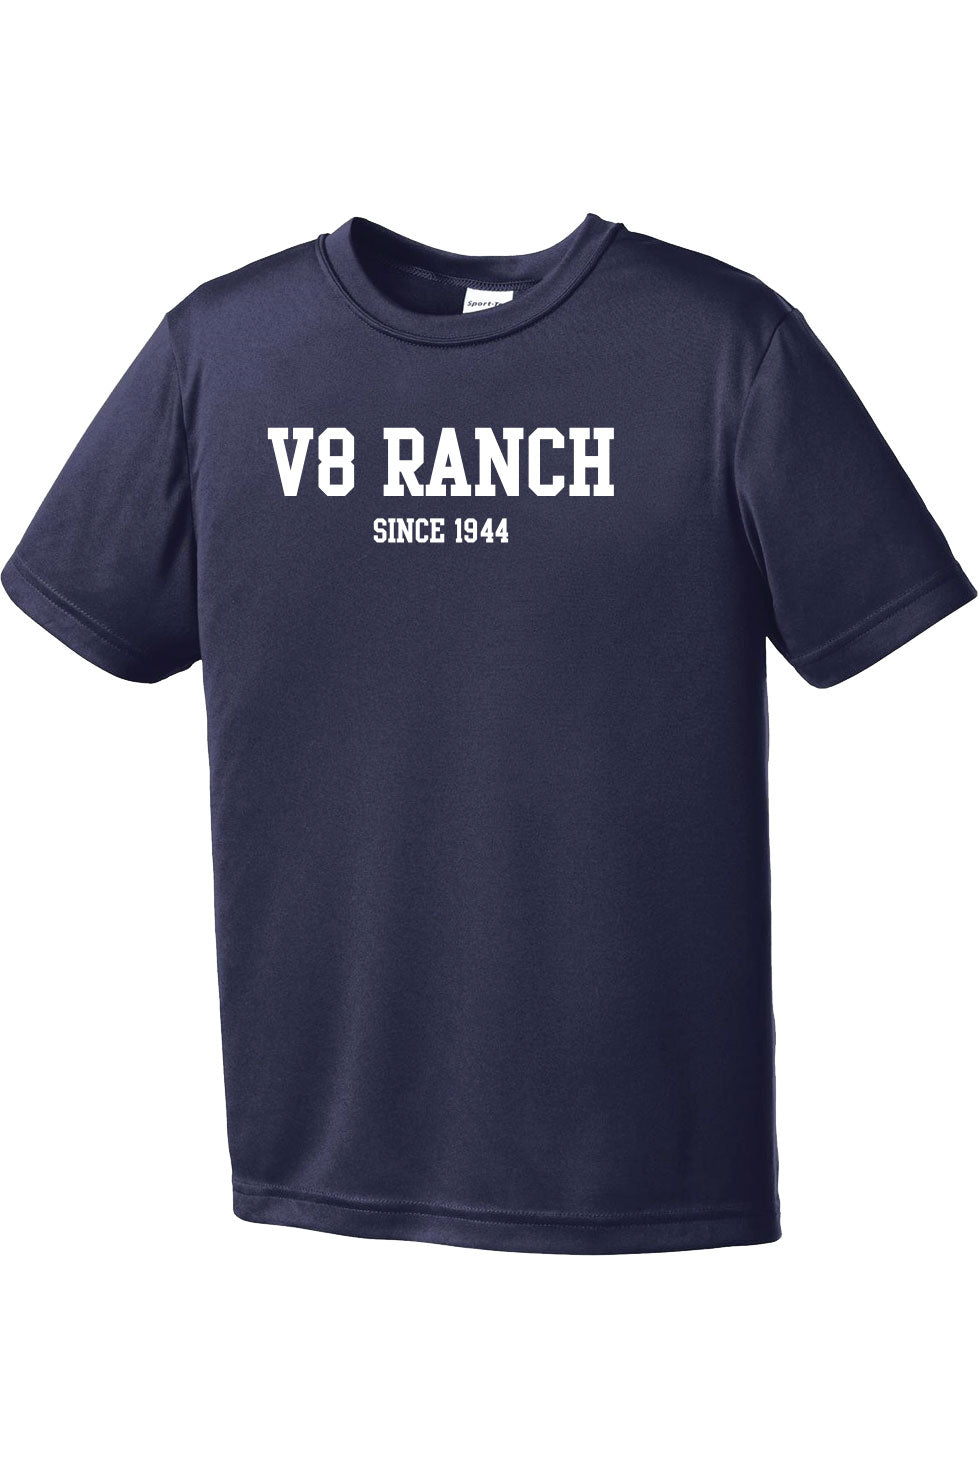 Youth Performance V8 Ranch Tee